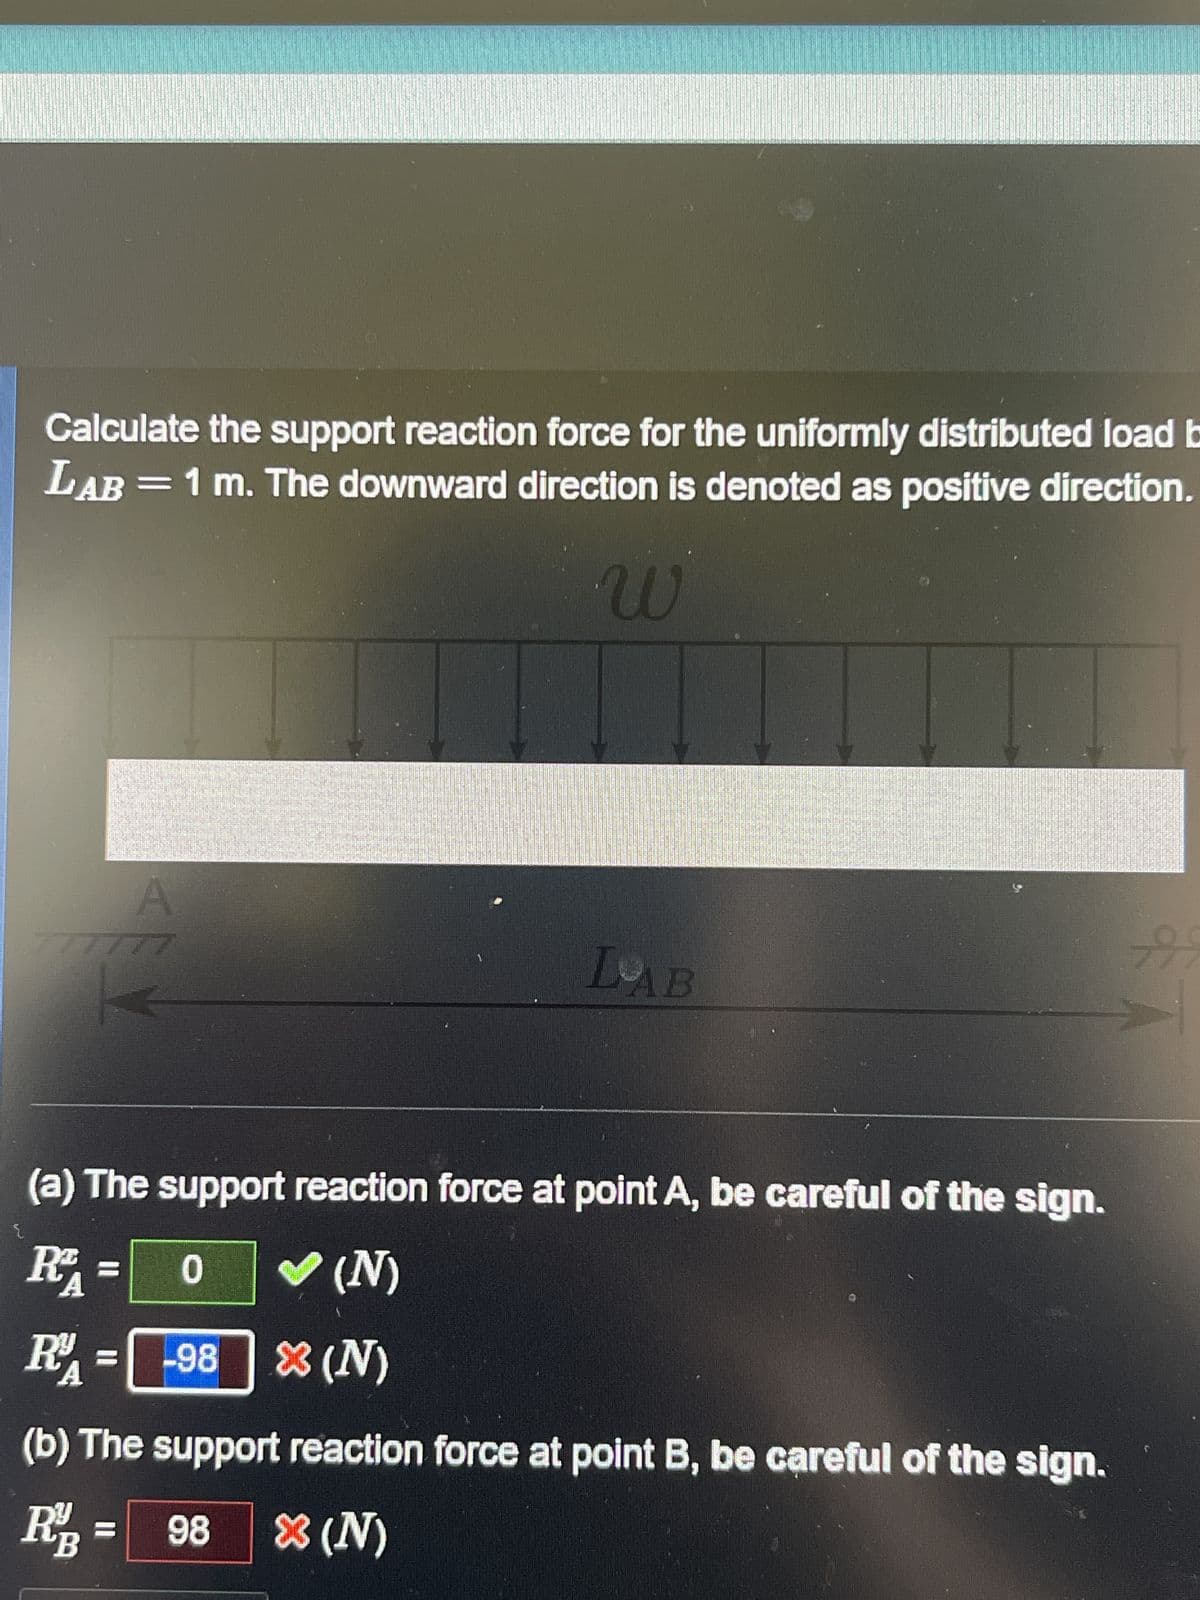 Calculate the support reaction force for the uniformly distributed load b
LAB = 1 m. The downward direction is denoted as positive direction.
W
A
777777
LAB
(a) The support reaction force at point A, be careful of the sign.
RA
0
✔ (N)
R
R = -98 (N)
(b) The support reaction force at point B, be careful of the sign.
RB =
* (N)
98
599